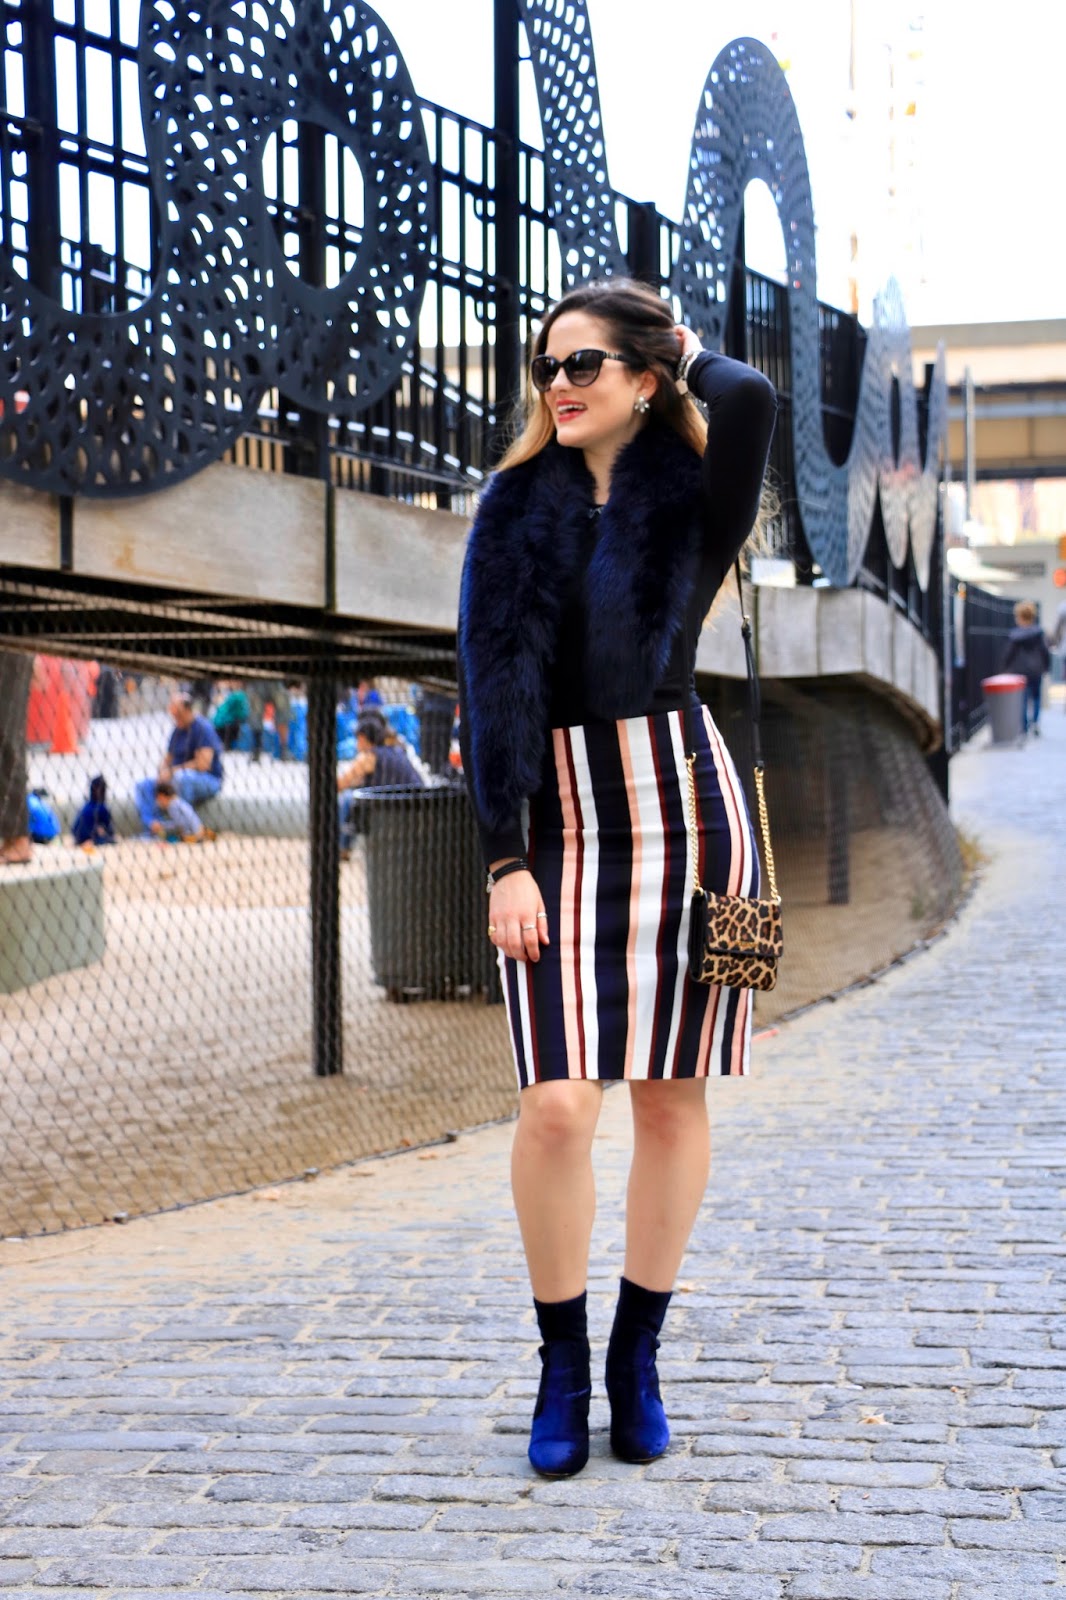 Nyc fashion blogger Kathleen Harper's holiday outfit ideas